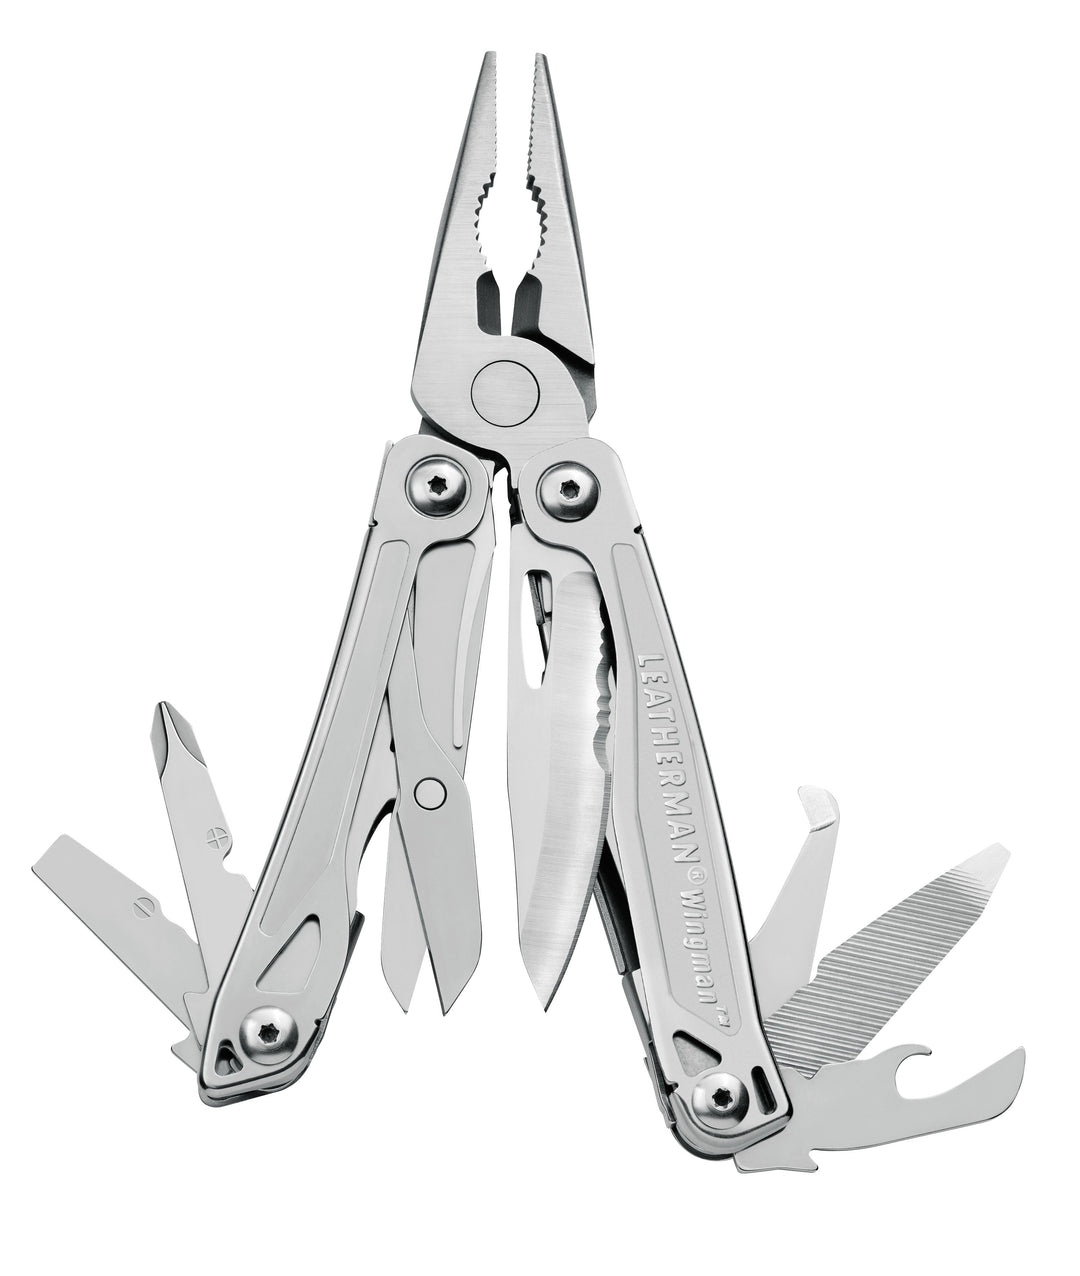 Wingman  Equipment Leatherman - The Back Alley Army Store